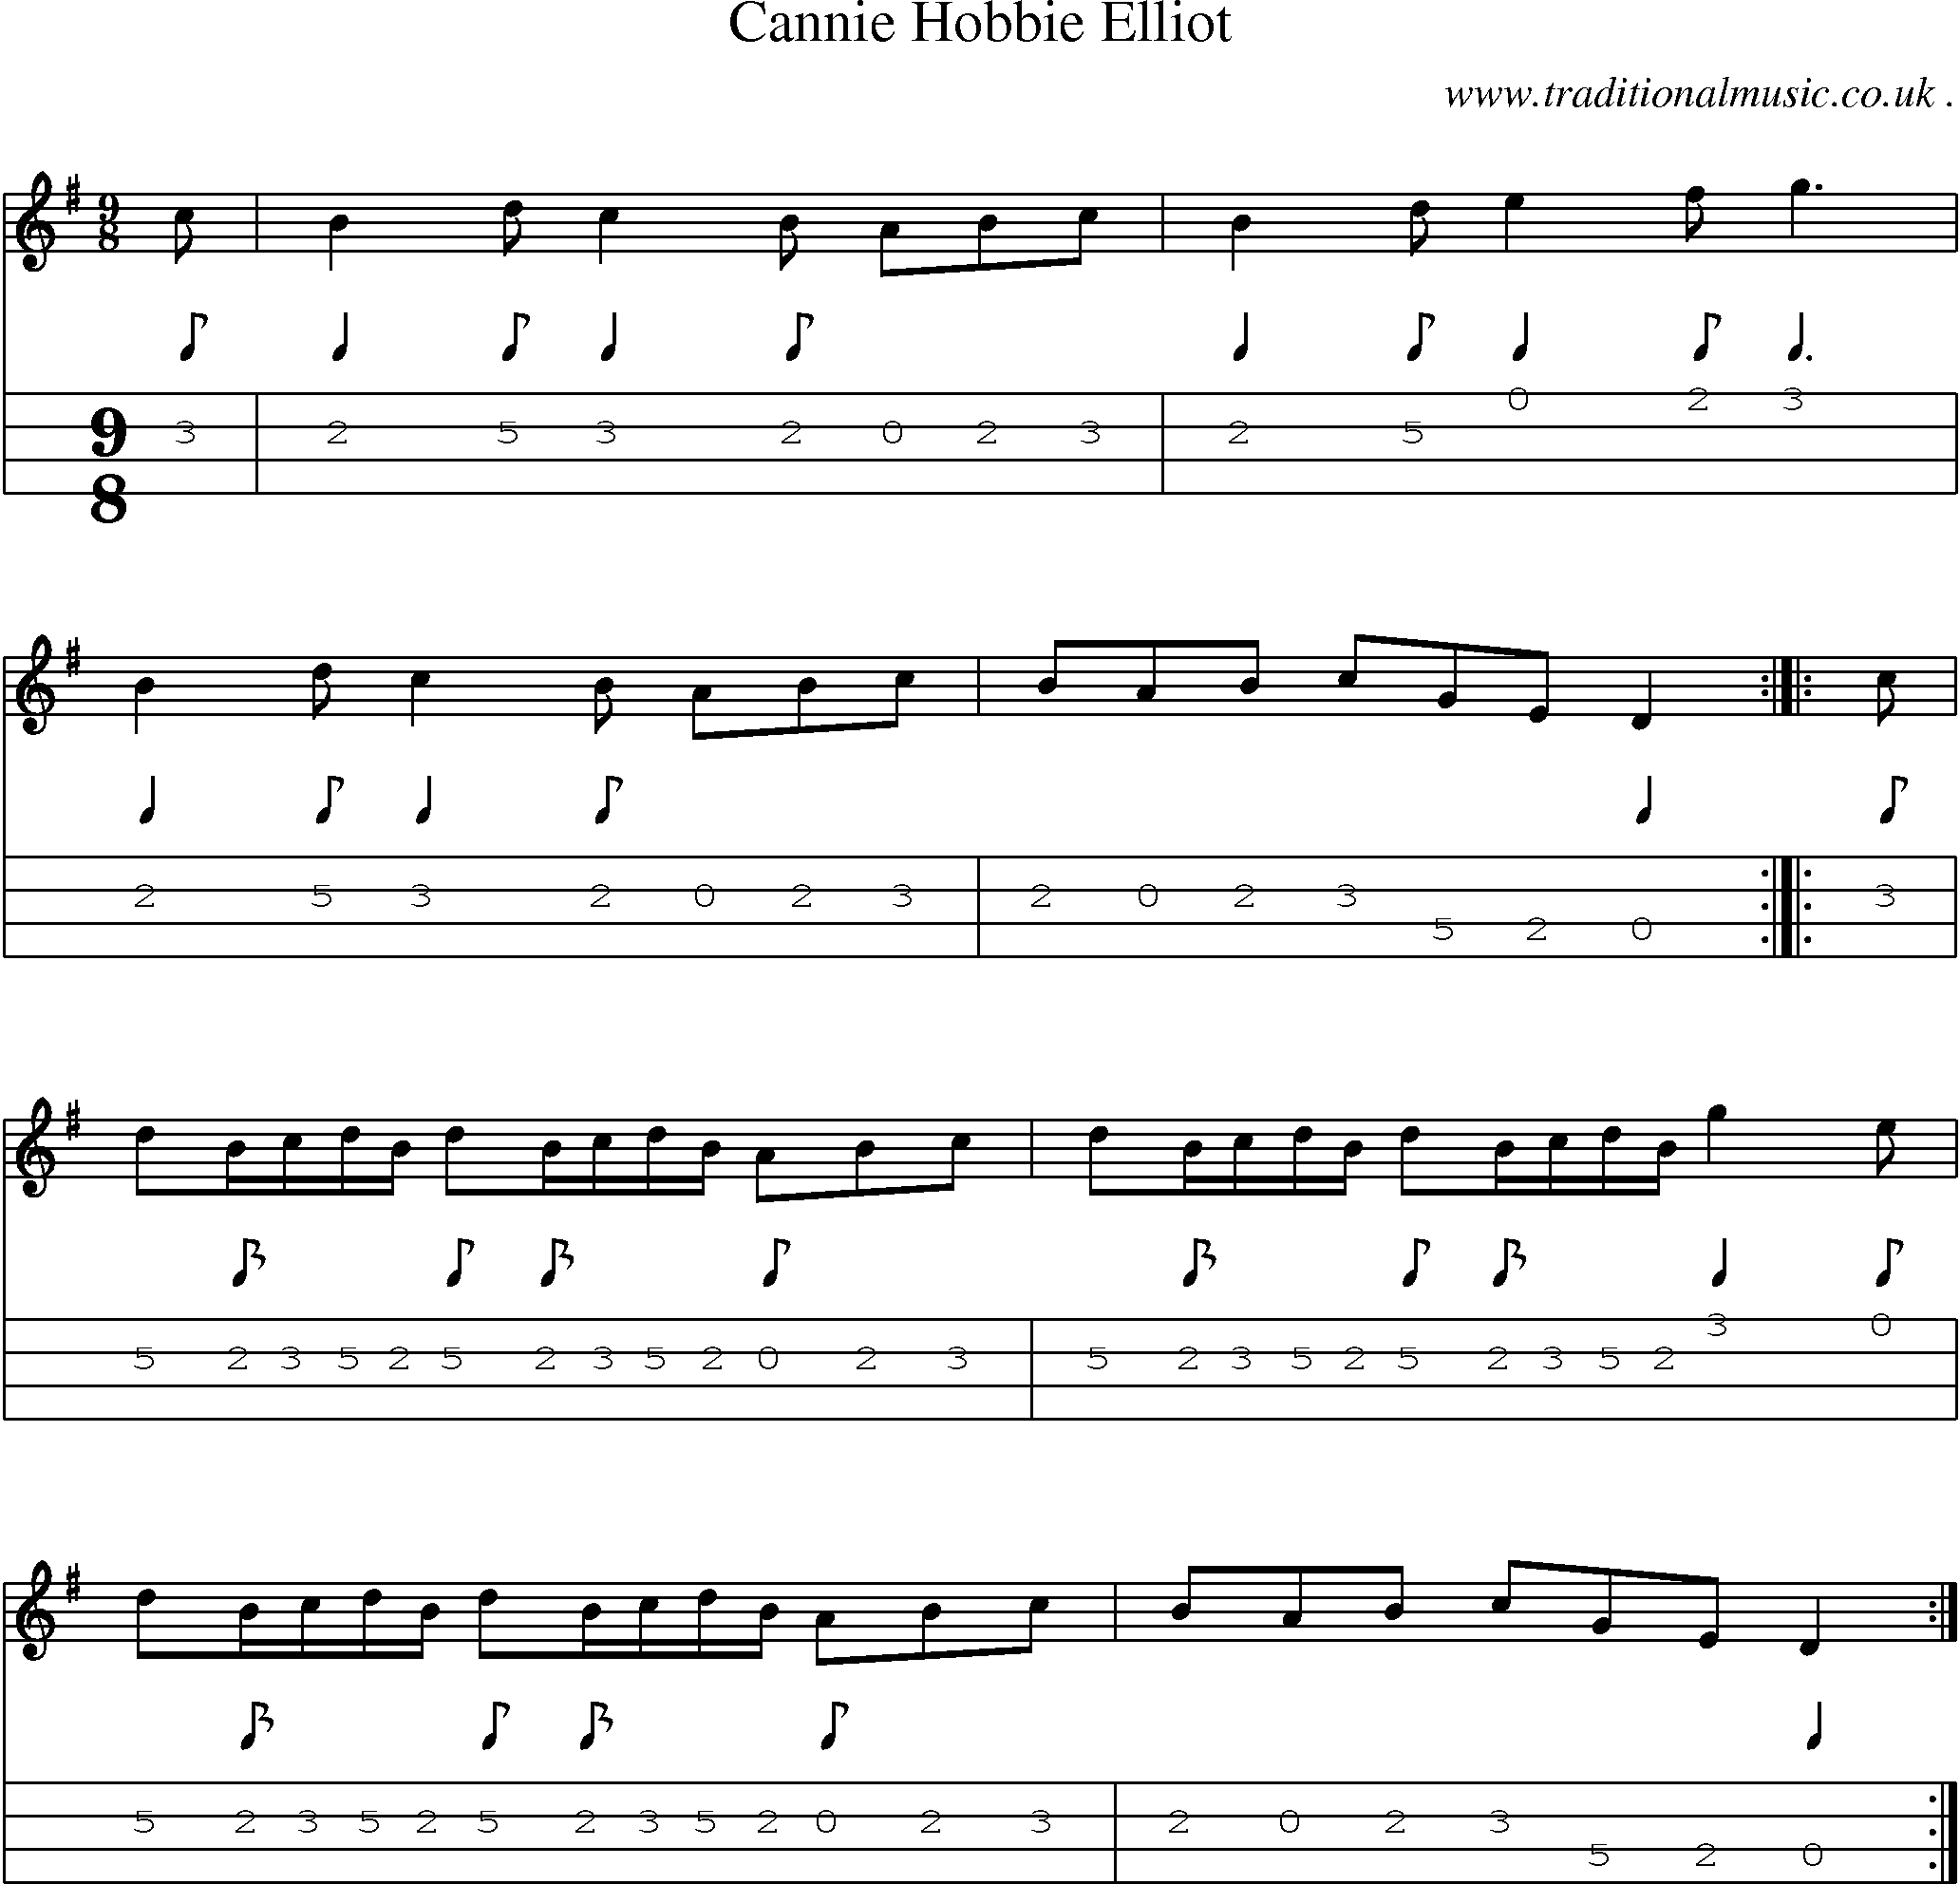 Sheet-Music and Mandolin Tabs for Cannie Hobbie Elliot